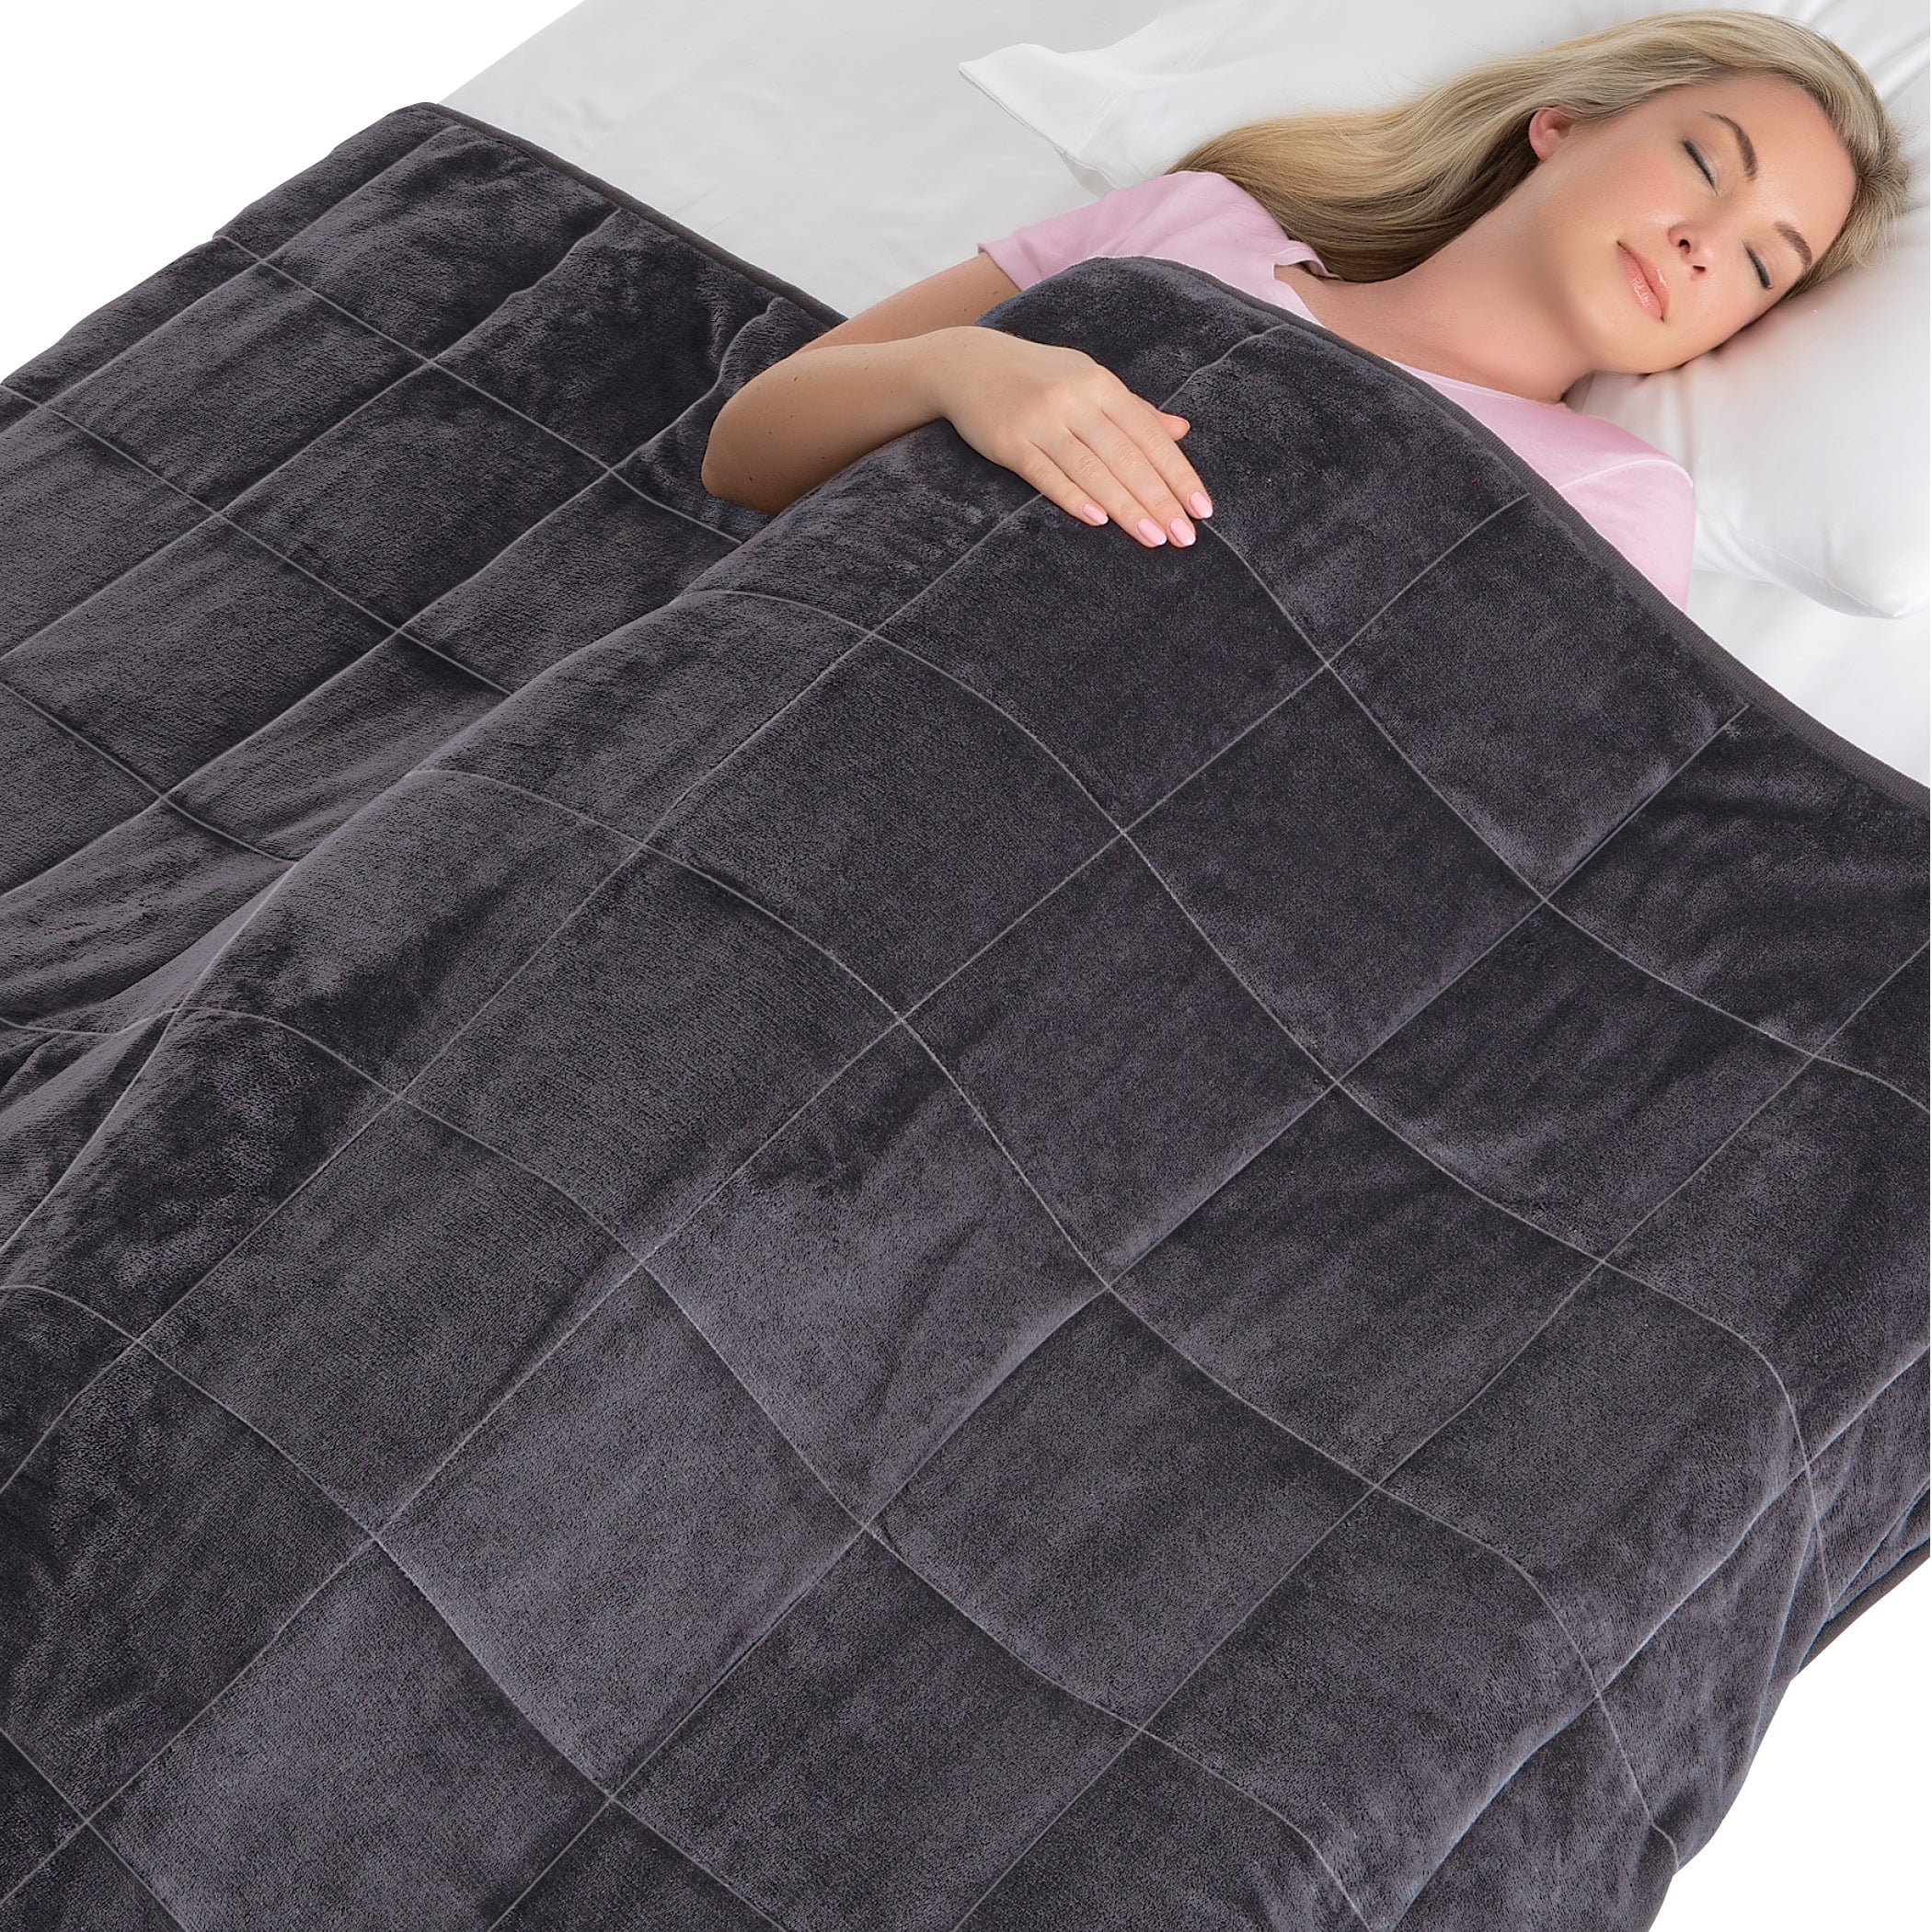 NEW Kids Weighted Calming Blanket Great for Anxiety and a Deep Sleep Taupe 